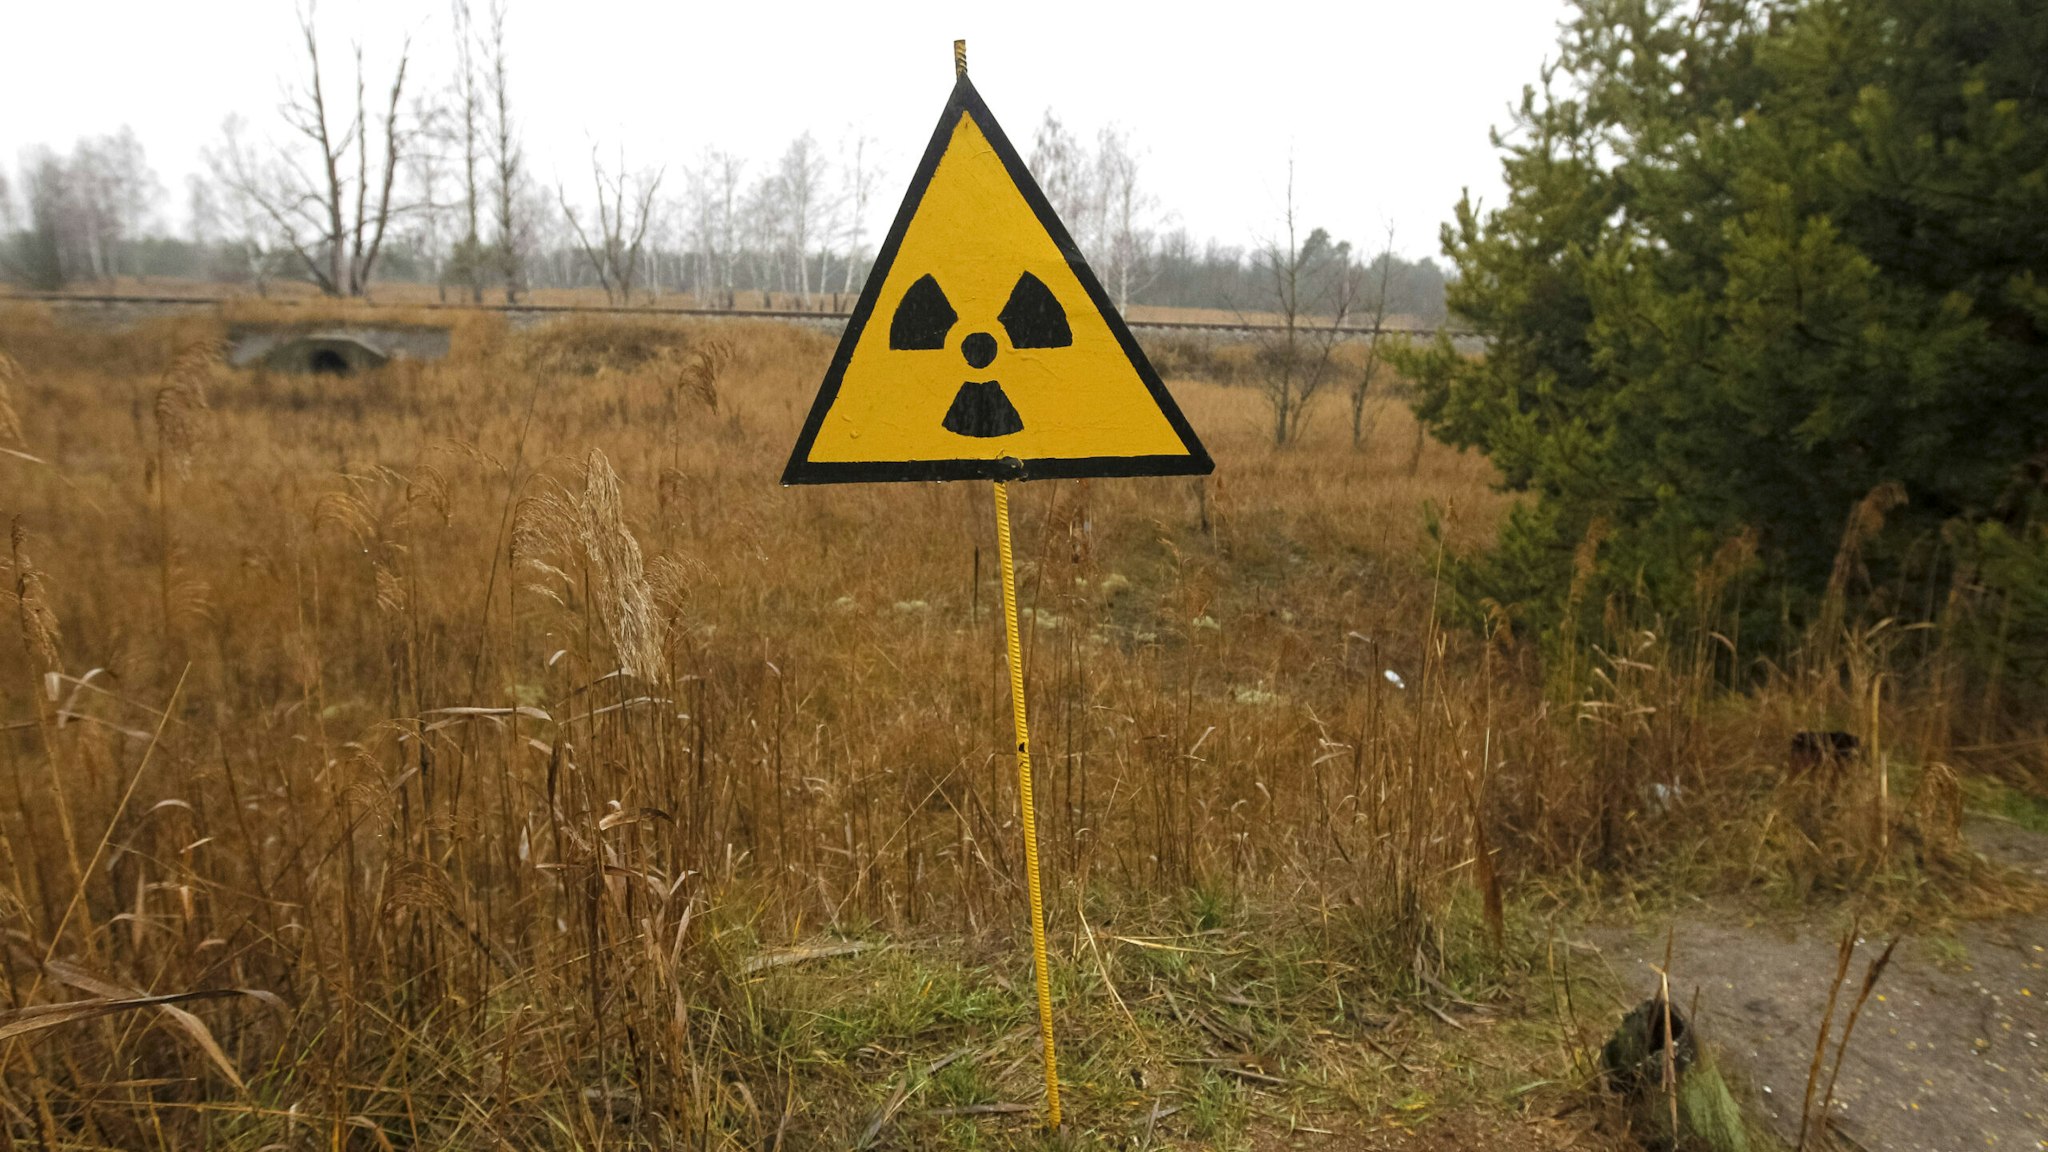 PRIPYAT, KIEV, UKRAINE - 2019/12/25: A radiation sign is seen at the Chernobyl Exclusion Zone in Kiev region, Ukraine.The Chernobyl nuclear accident on April 26, 1986 is regarded as the largest of its kind in the history of nuclear energy.